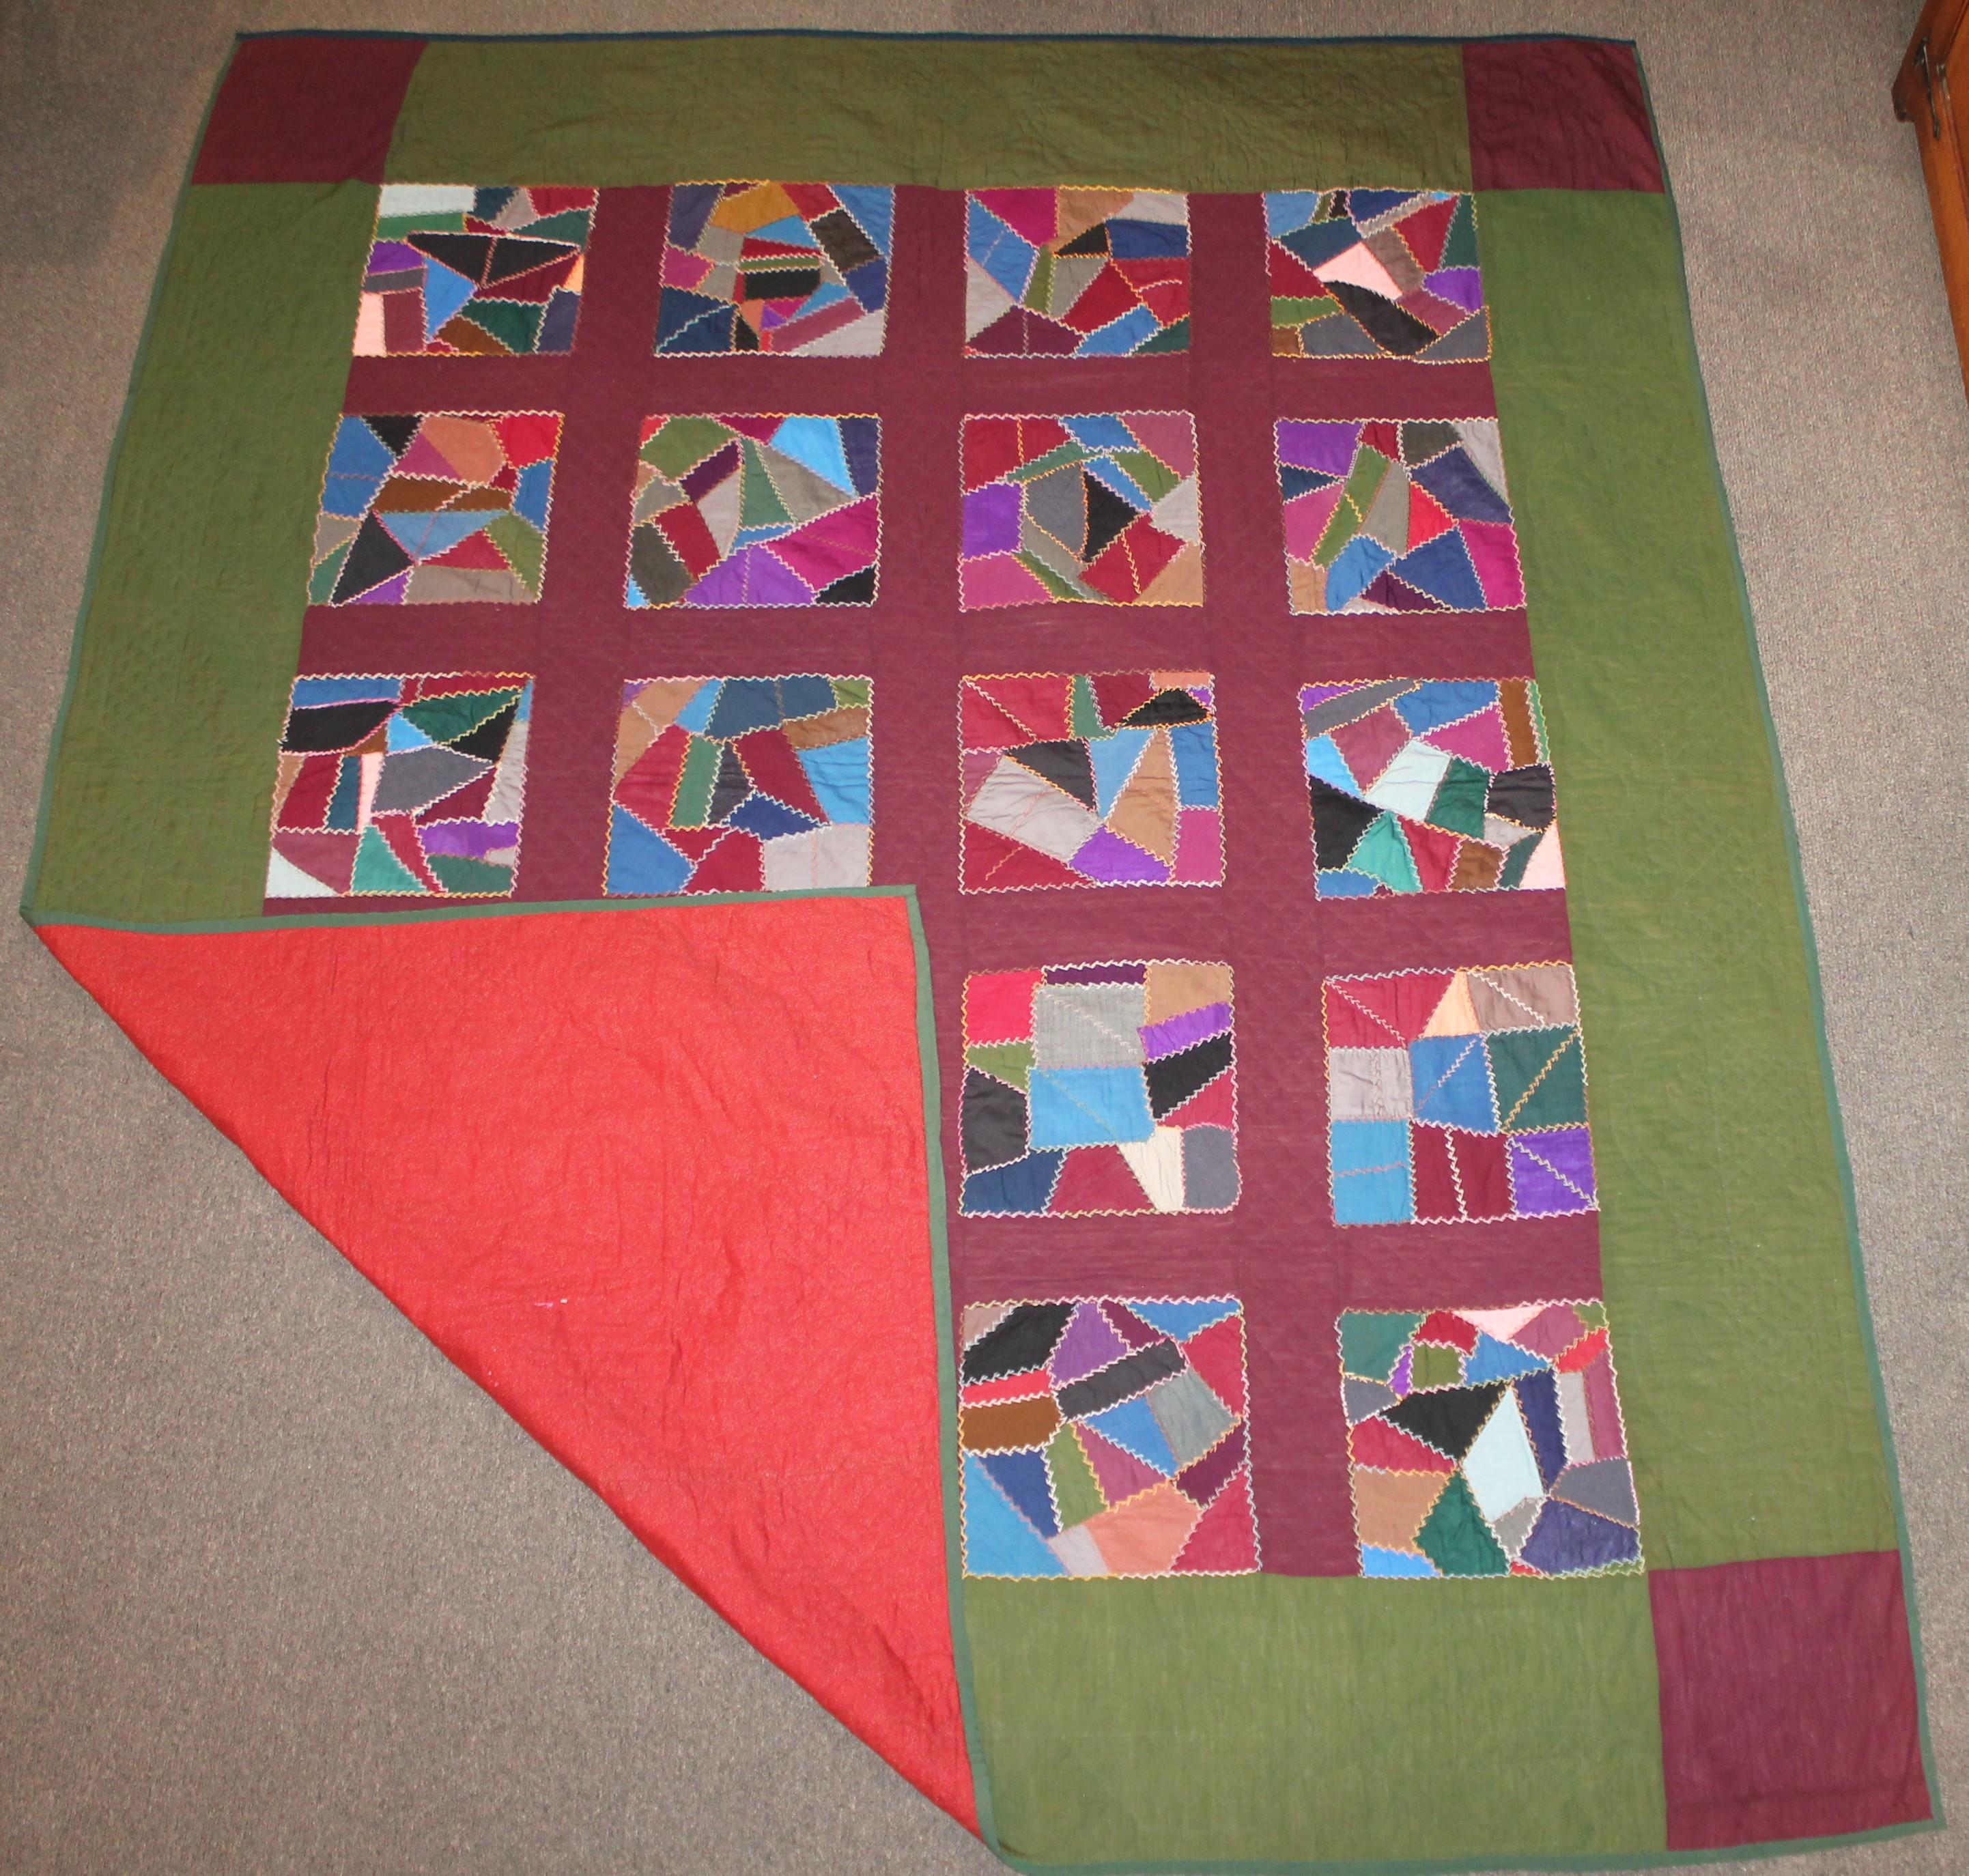 This all wool Amish contained crazy quilt in a square from Lancaster County, Pennsylvania is in fine condition. The fine basket quilting border is on all sides. The pea green wool border has purple corner blocks and interior purple frames. The